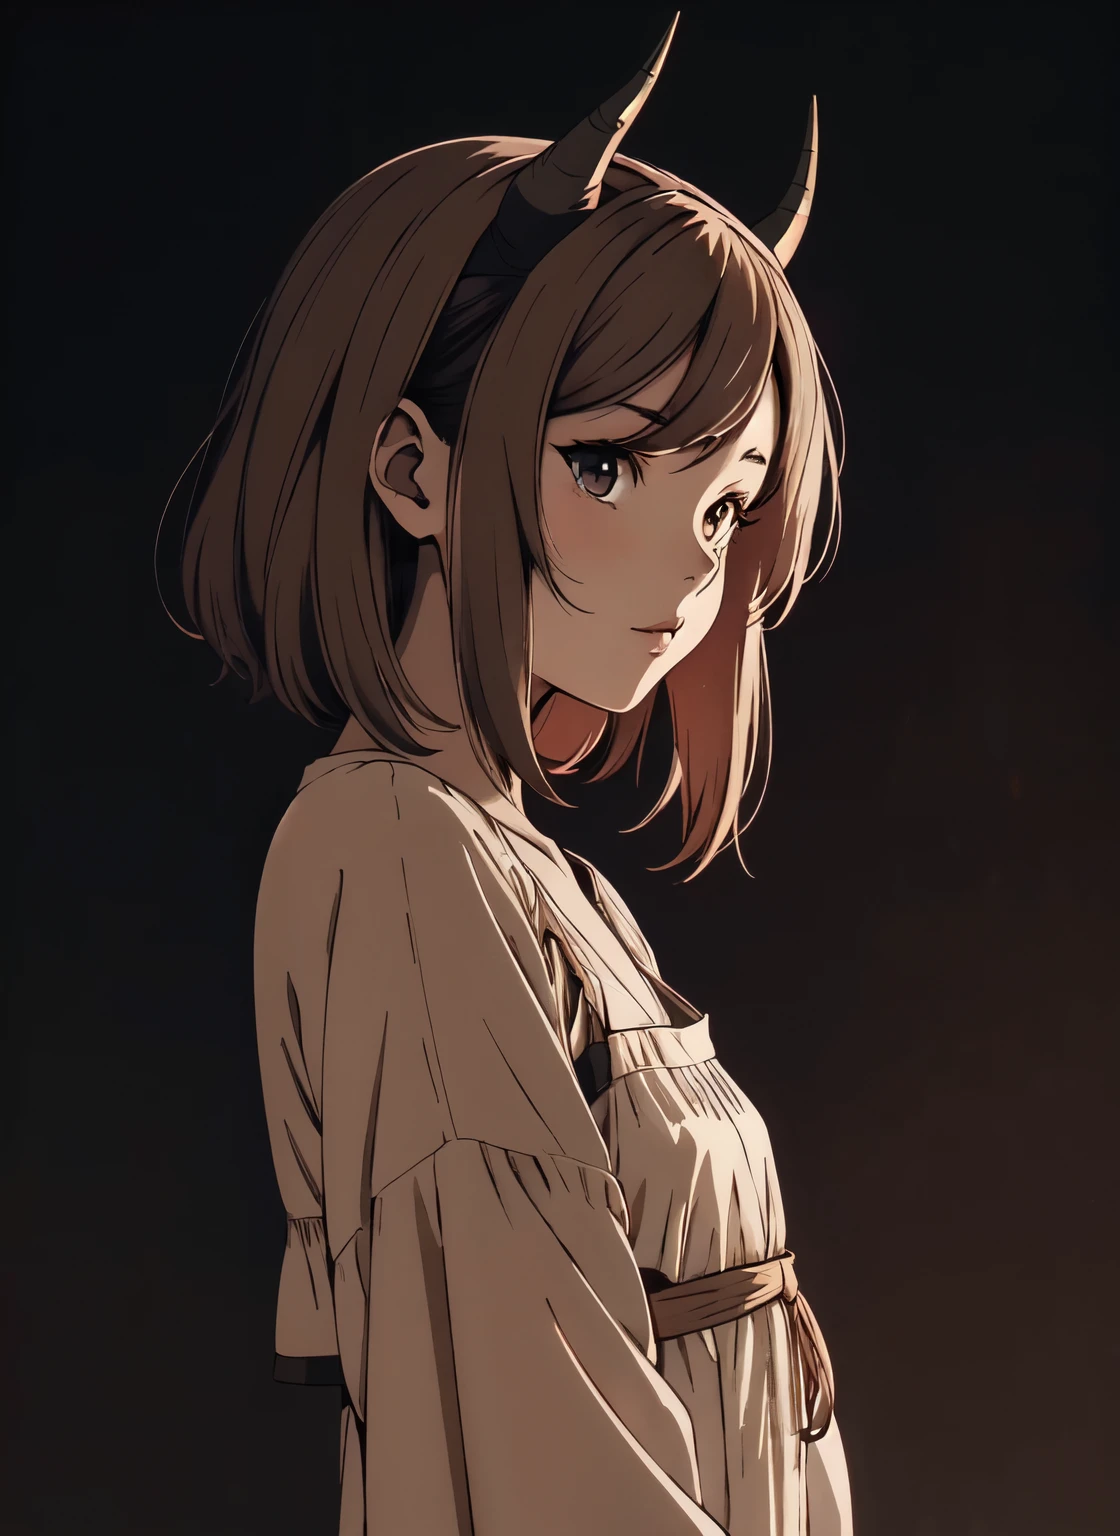 anime girl with short brown hair with two horns protruding from beneath her hair and a white dress standing in front of a dark background, artwork in the style of guweiz, profile of anime girl, portrait anime girl, beautiful anime portrait, looking to the viewer, 